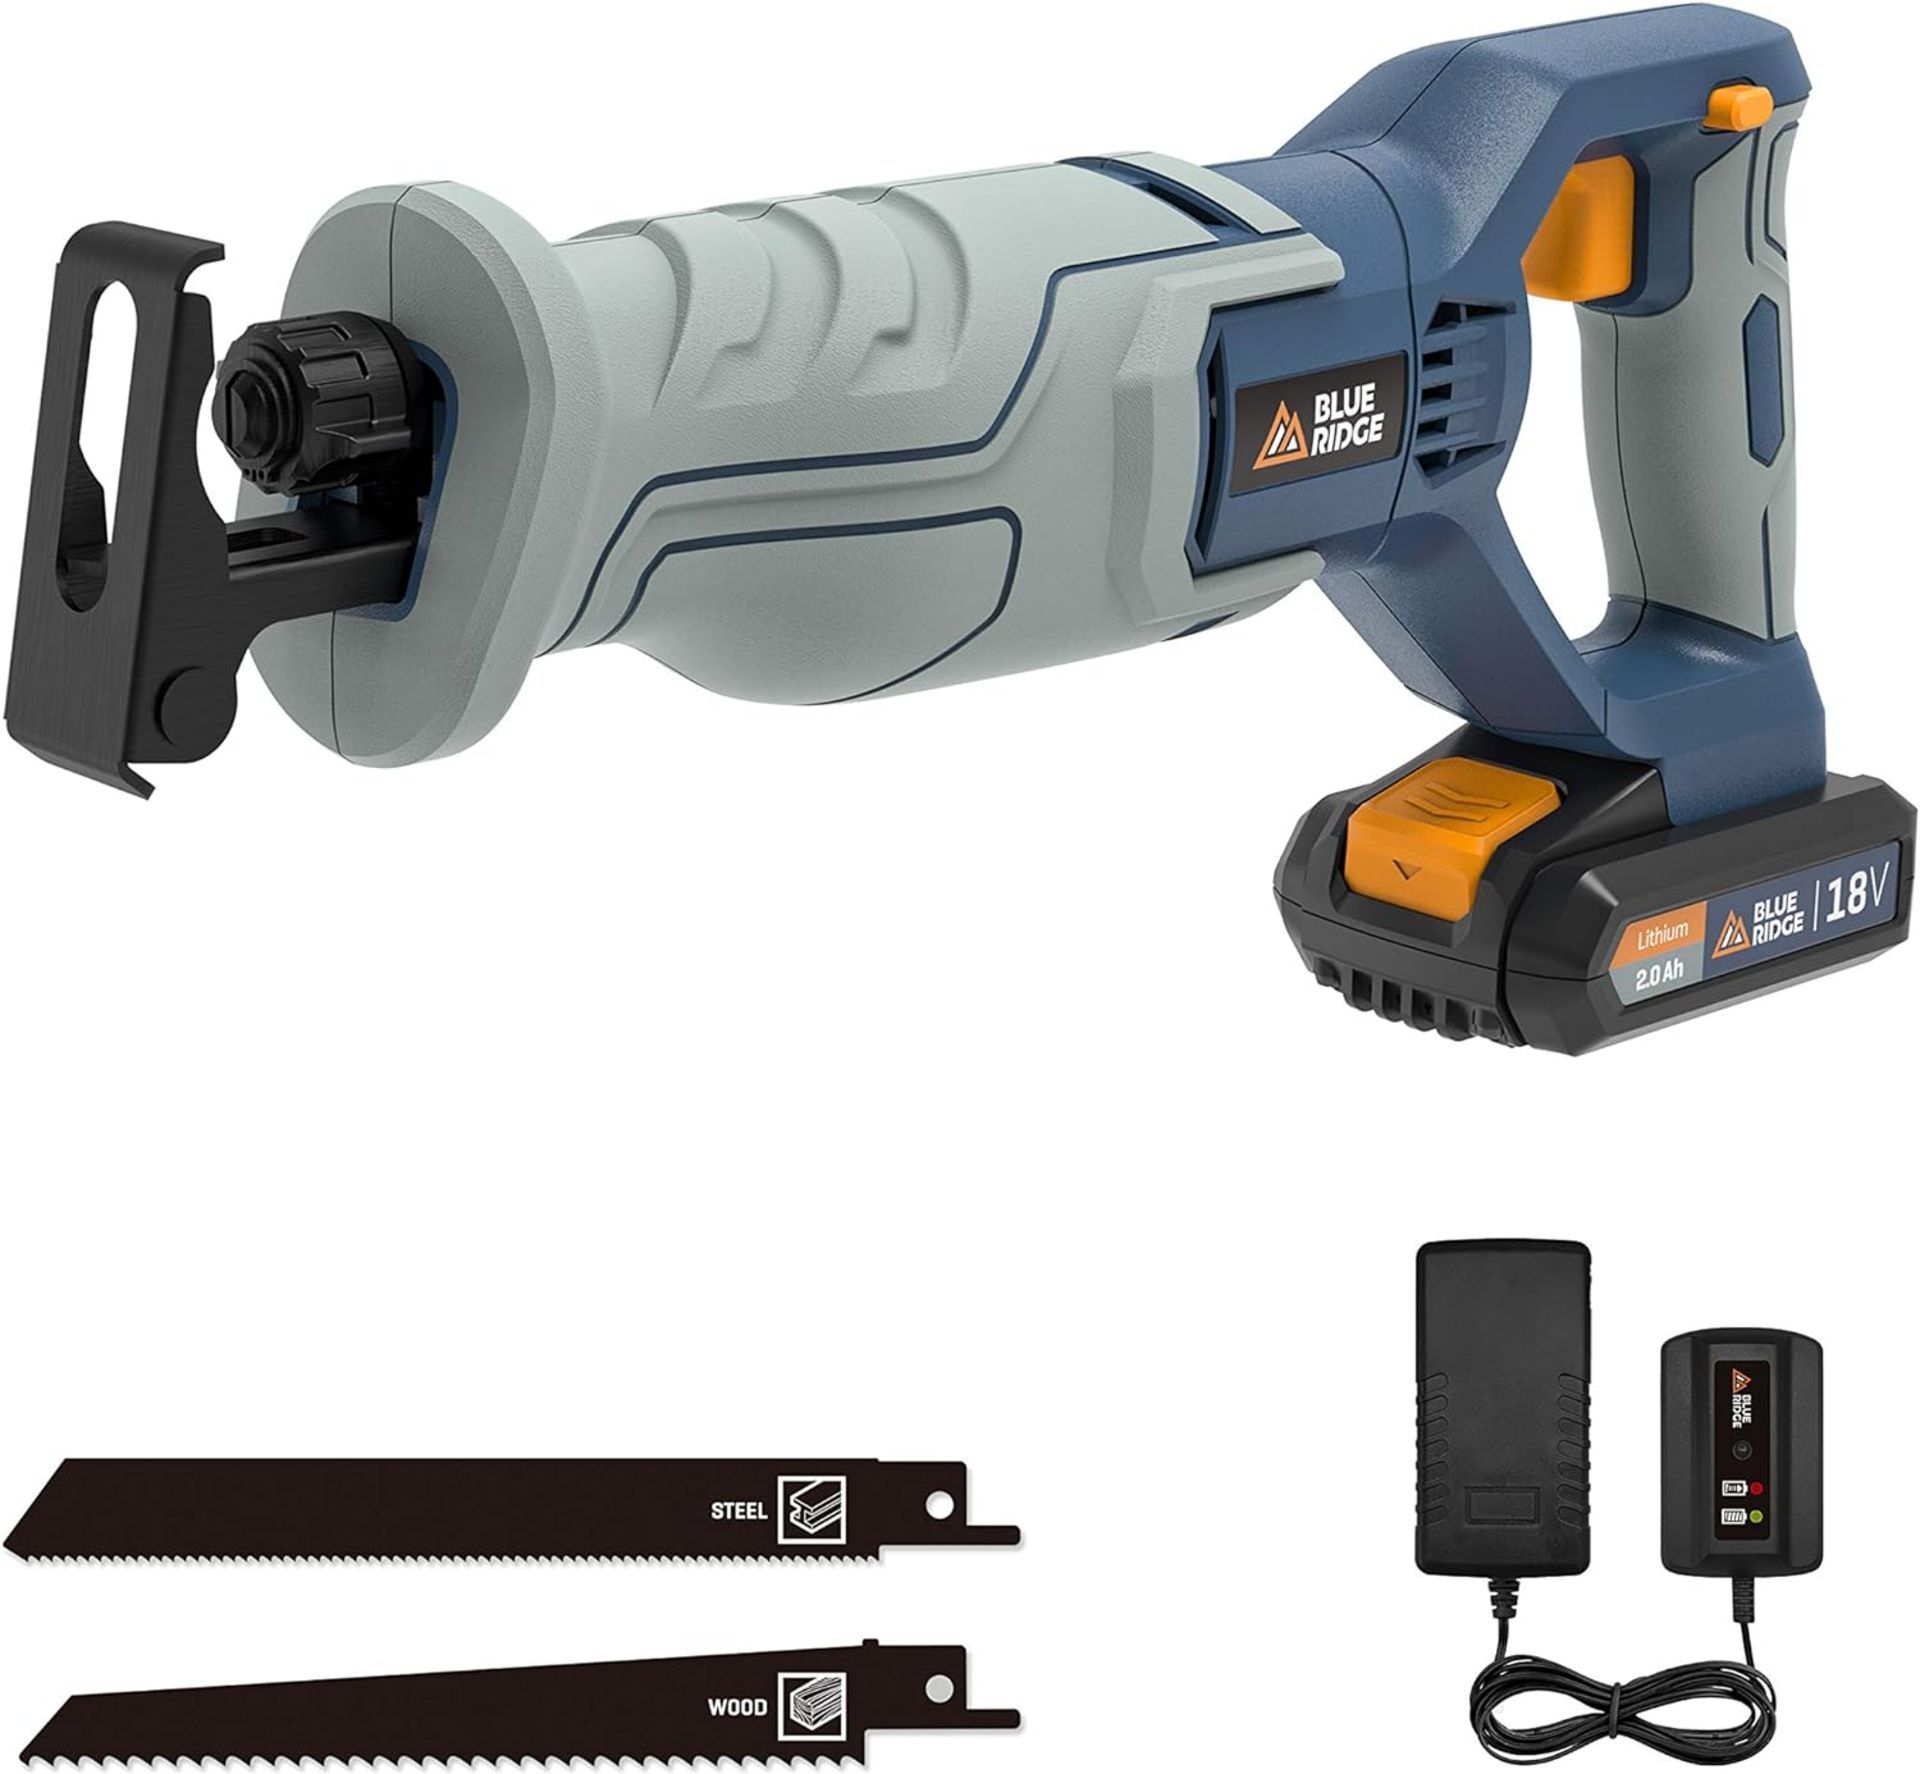 3x NEW & BOXED BLUE RIDGE 18V Reciprocating Cordless Sabre Saw with 2.0Ah Battery. RRP £99 EACH.